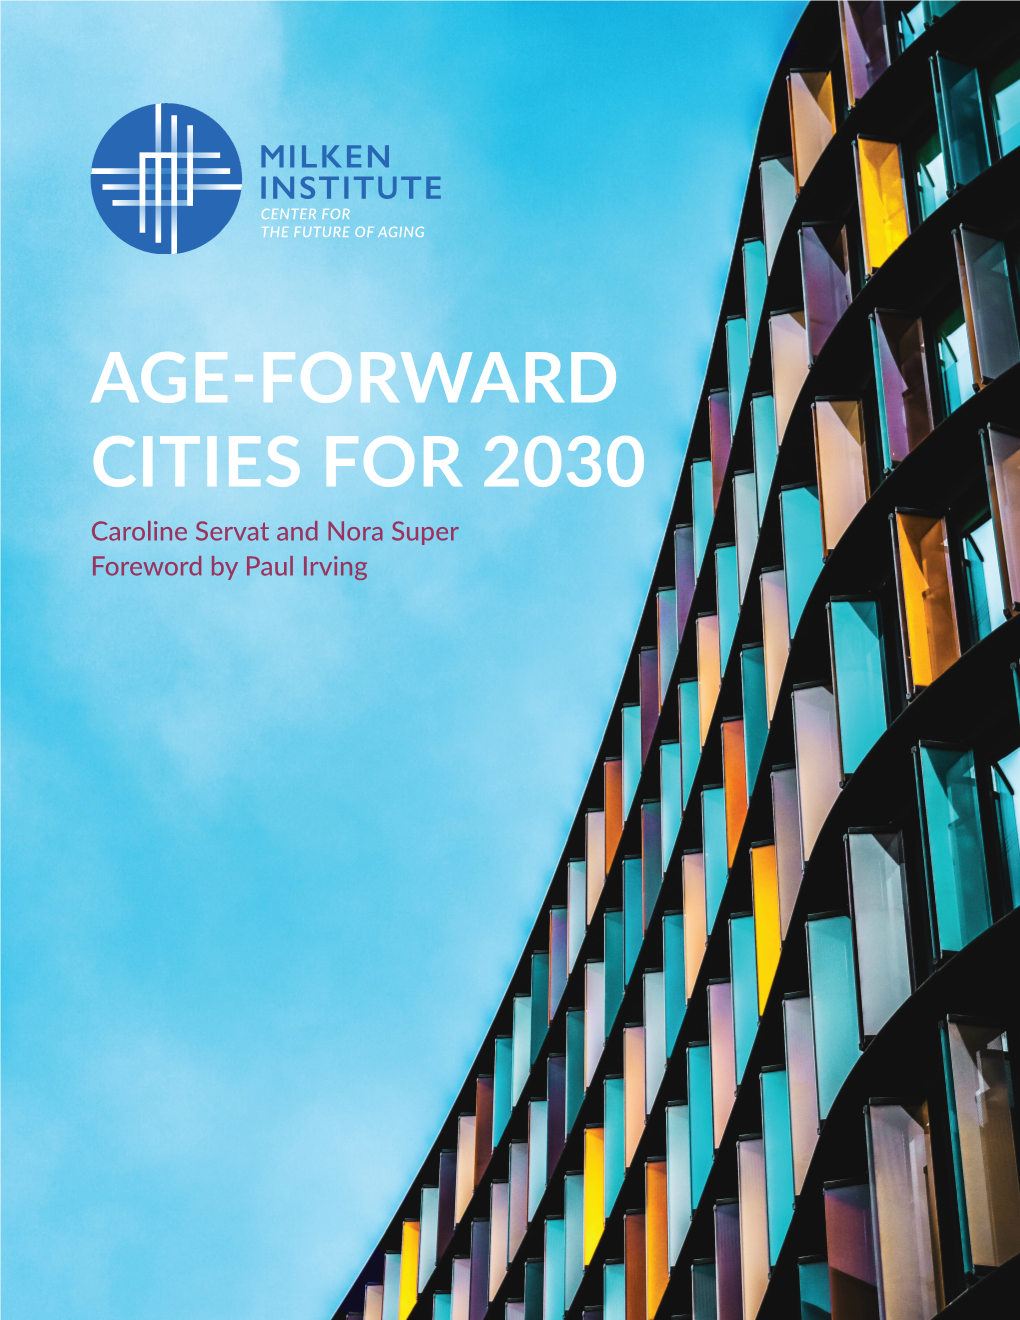 AGE-FORWARD CITIES for 2030 Caroline Servat and Nora Super Foreword by Paul Irving ABOUT the MILKEN INSTITUTE